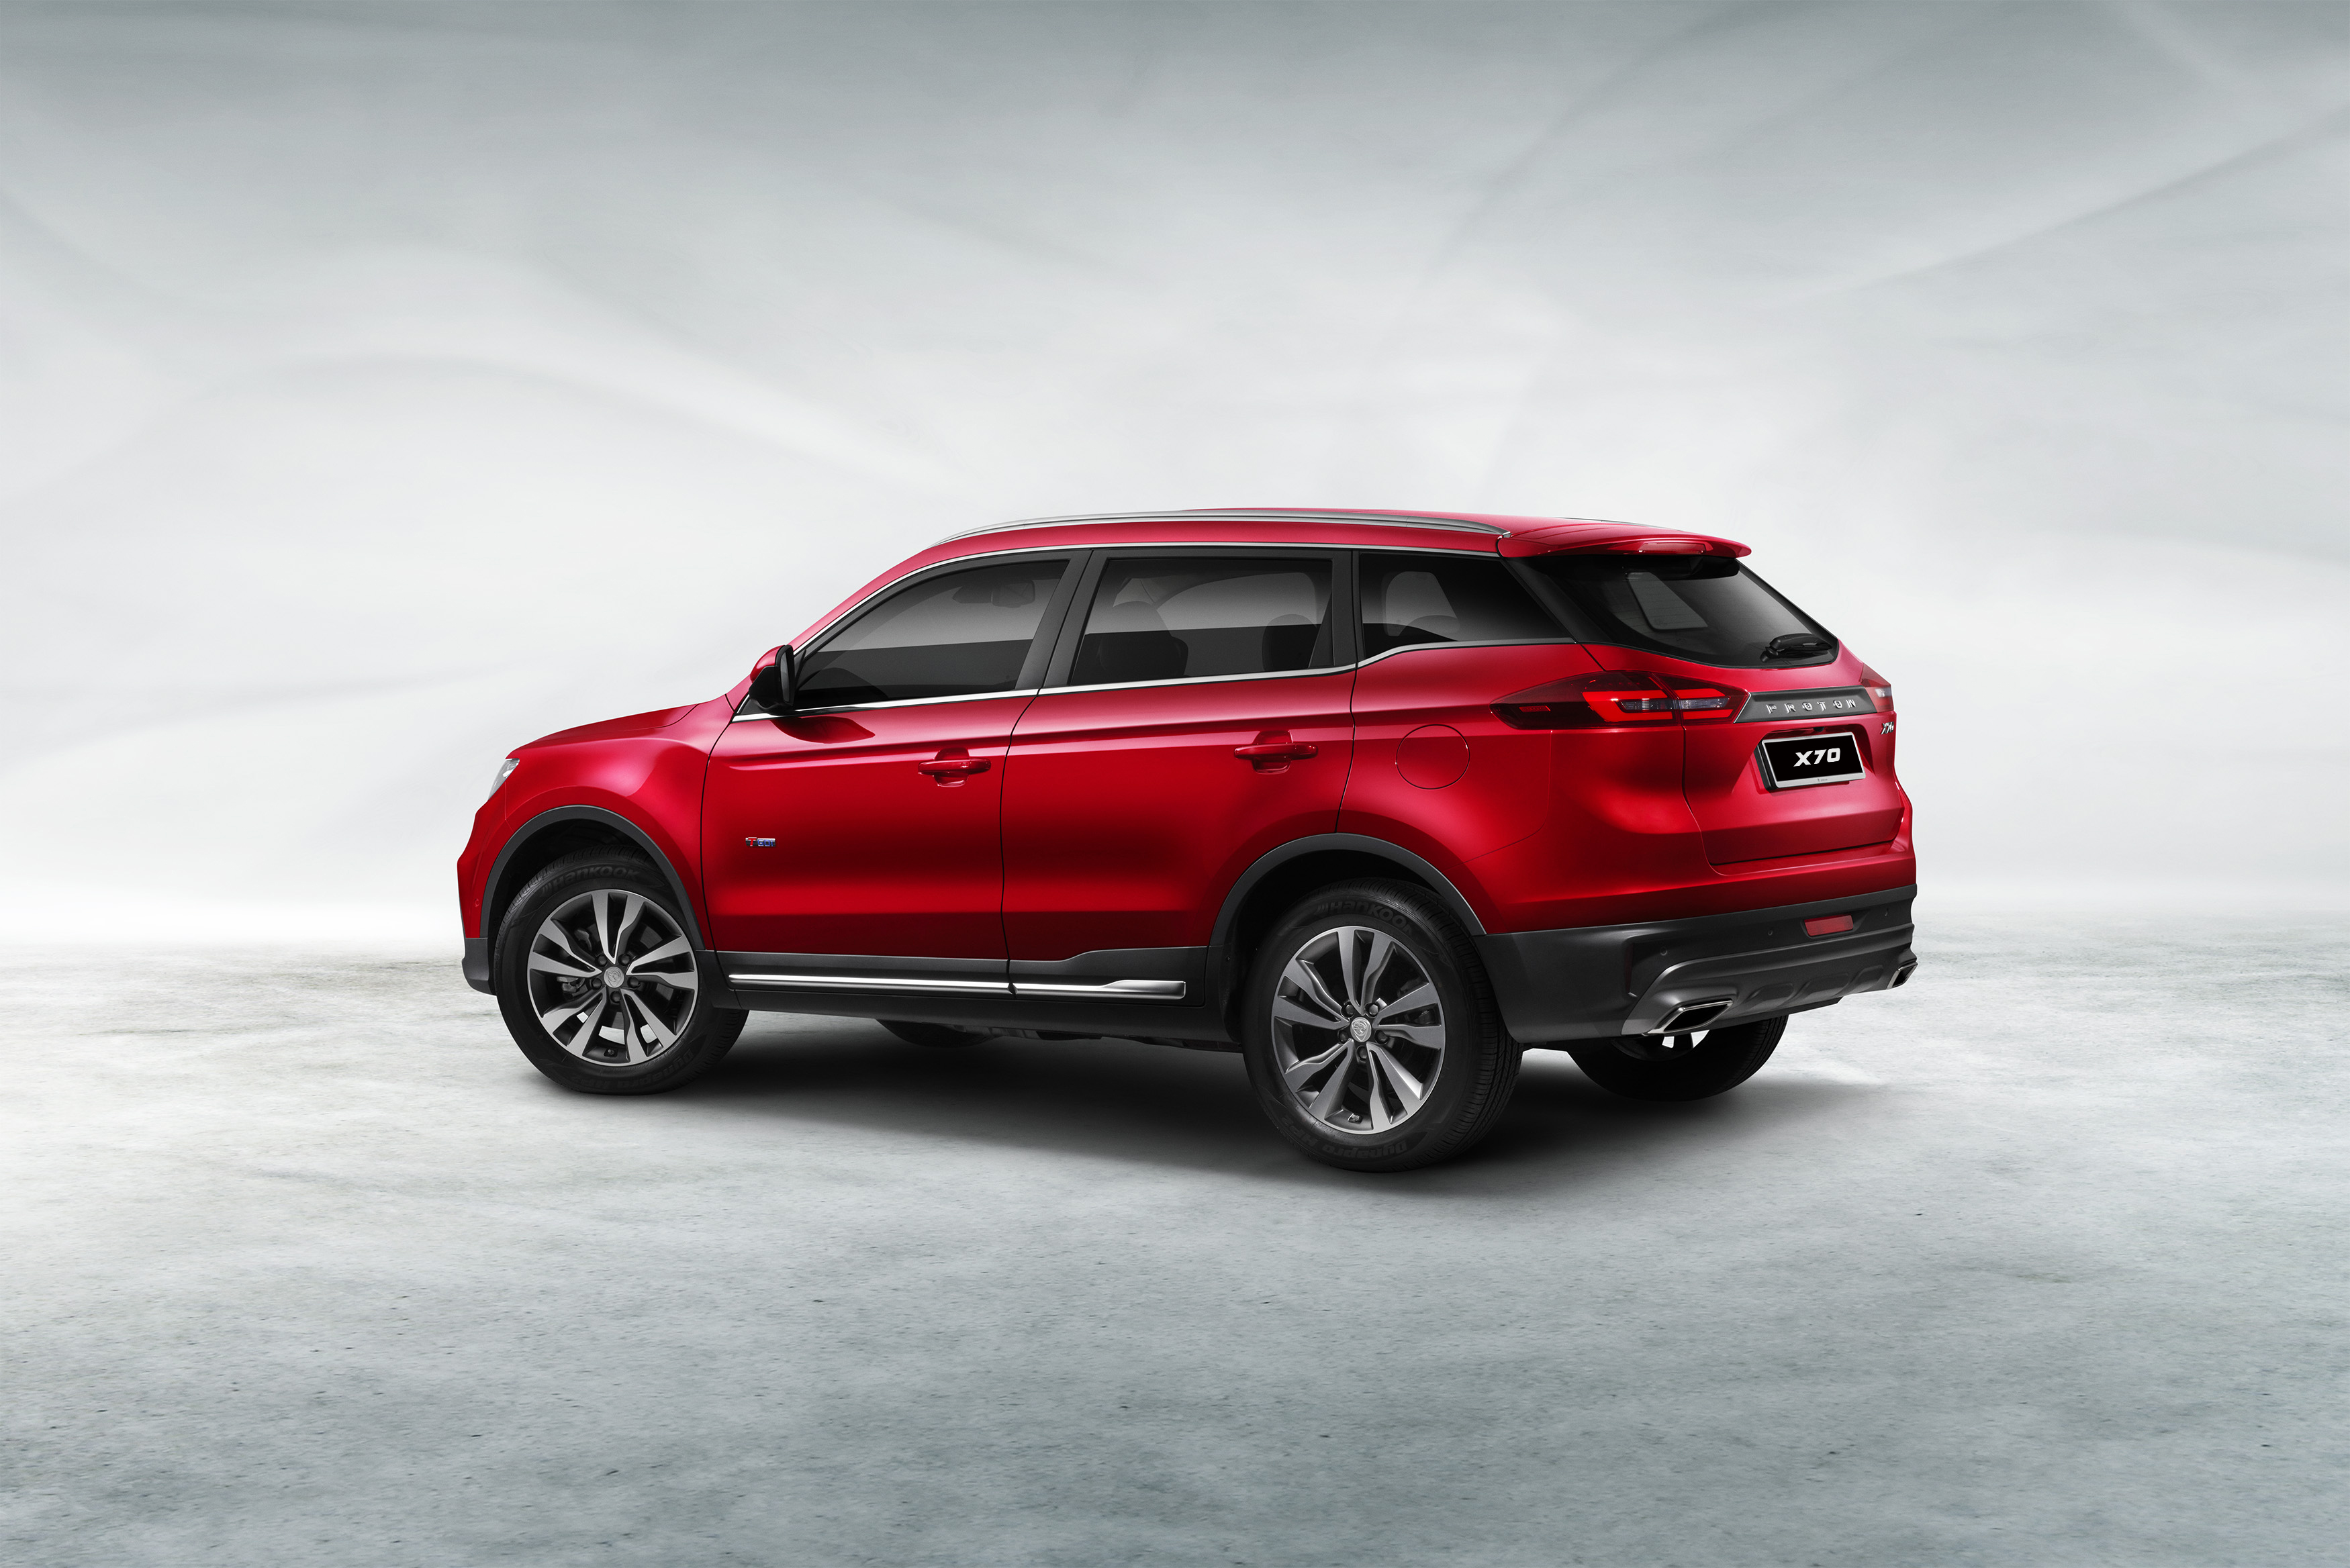  Proton  Previews New X70 SUV  Bookings Can Be Made From 8th 